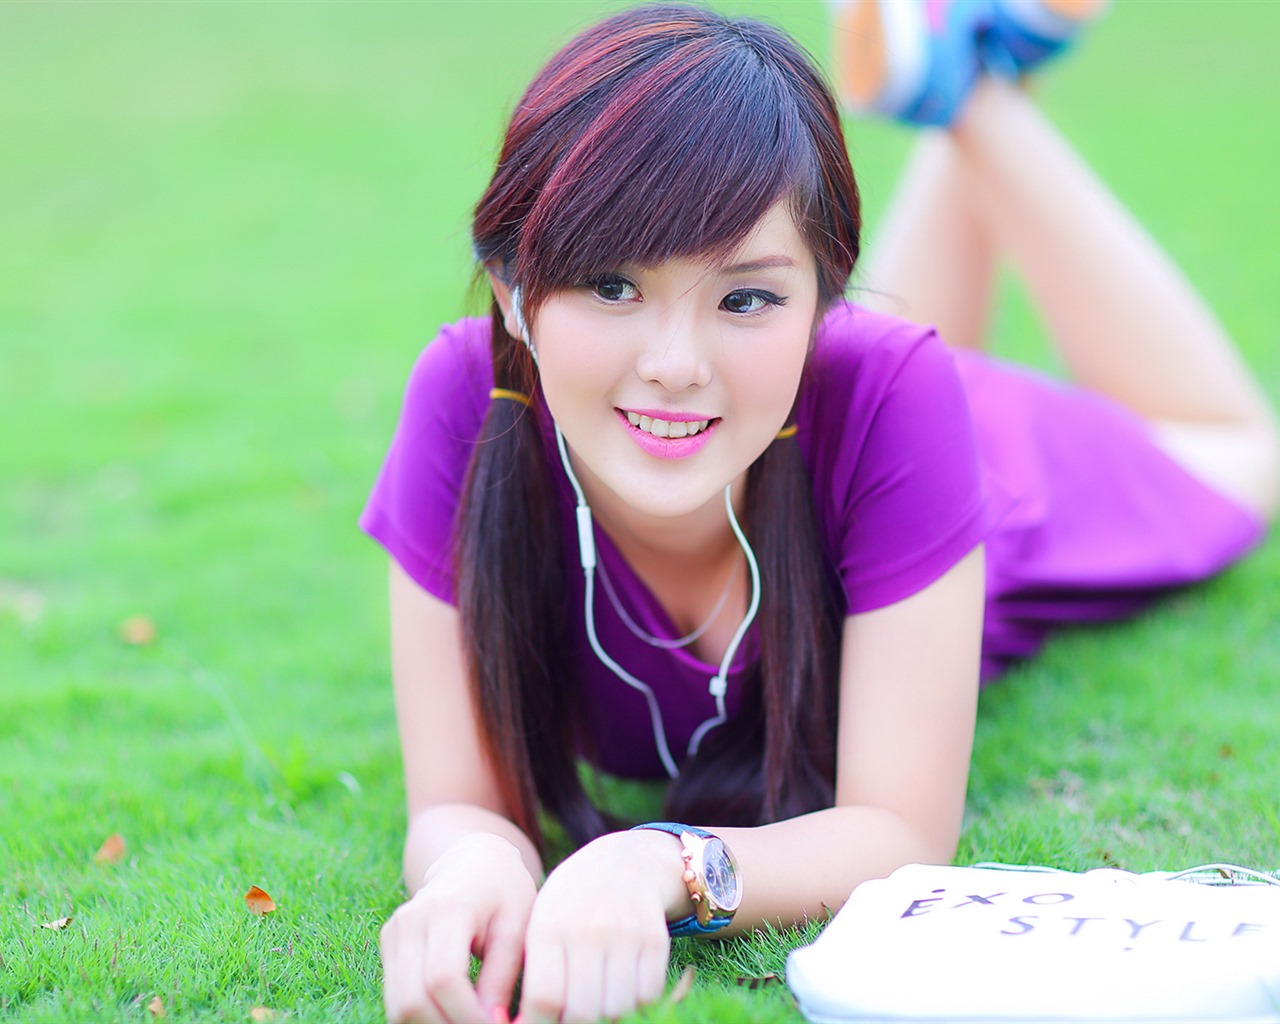 Pure and lovely young Asian girl HD wallpapers collection (3) #19 - 1280x1024